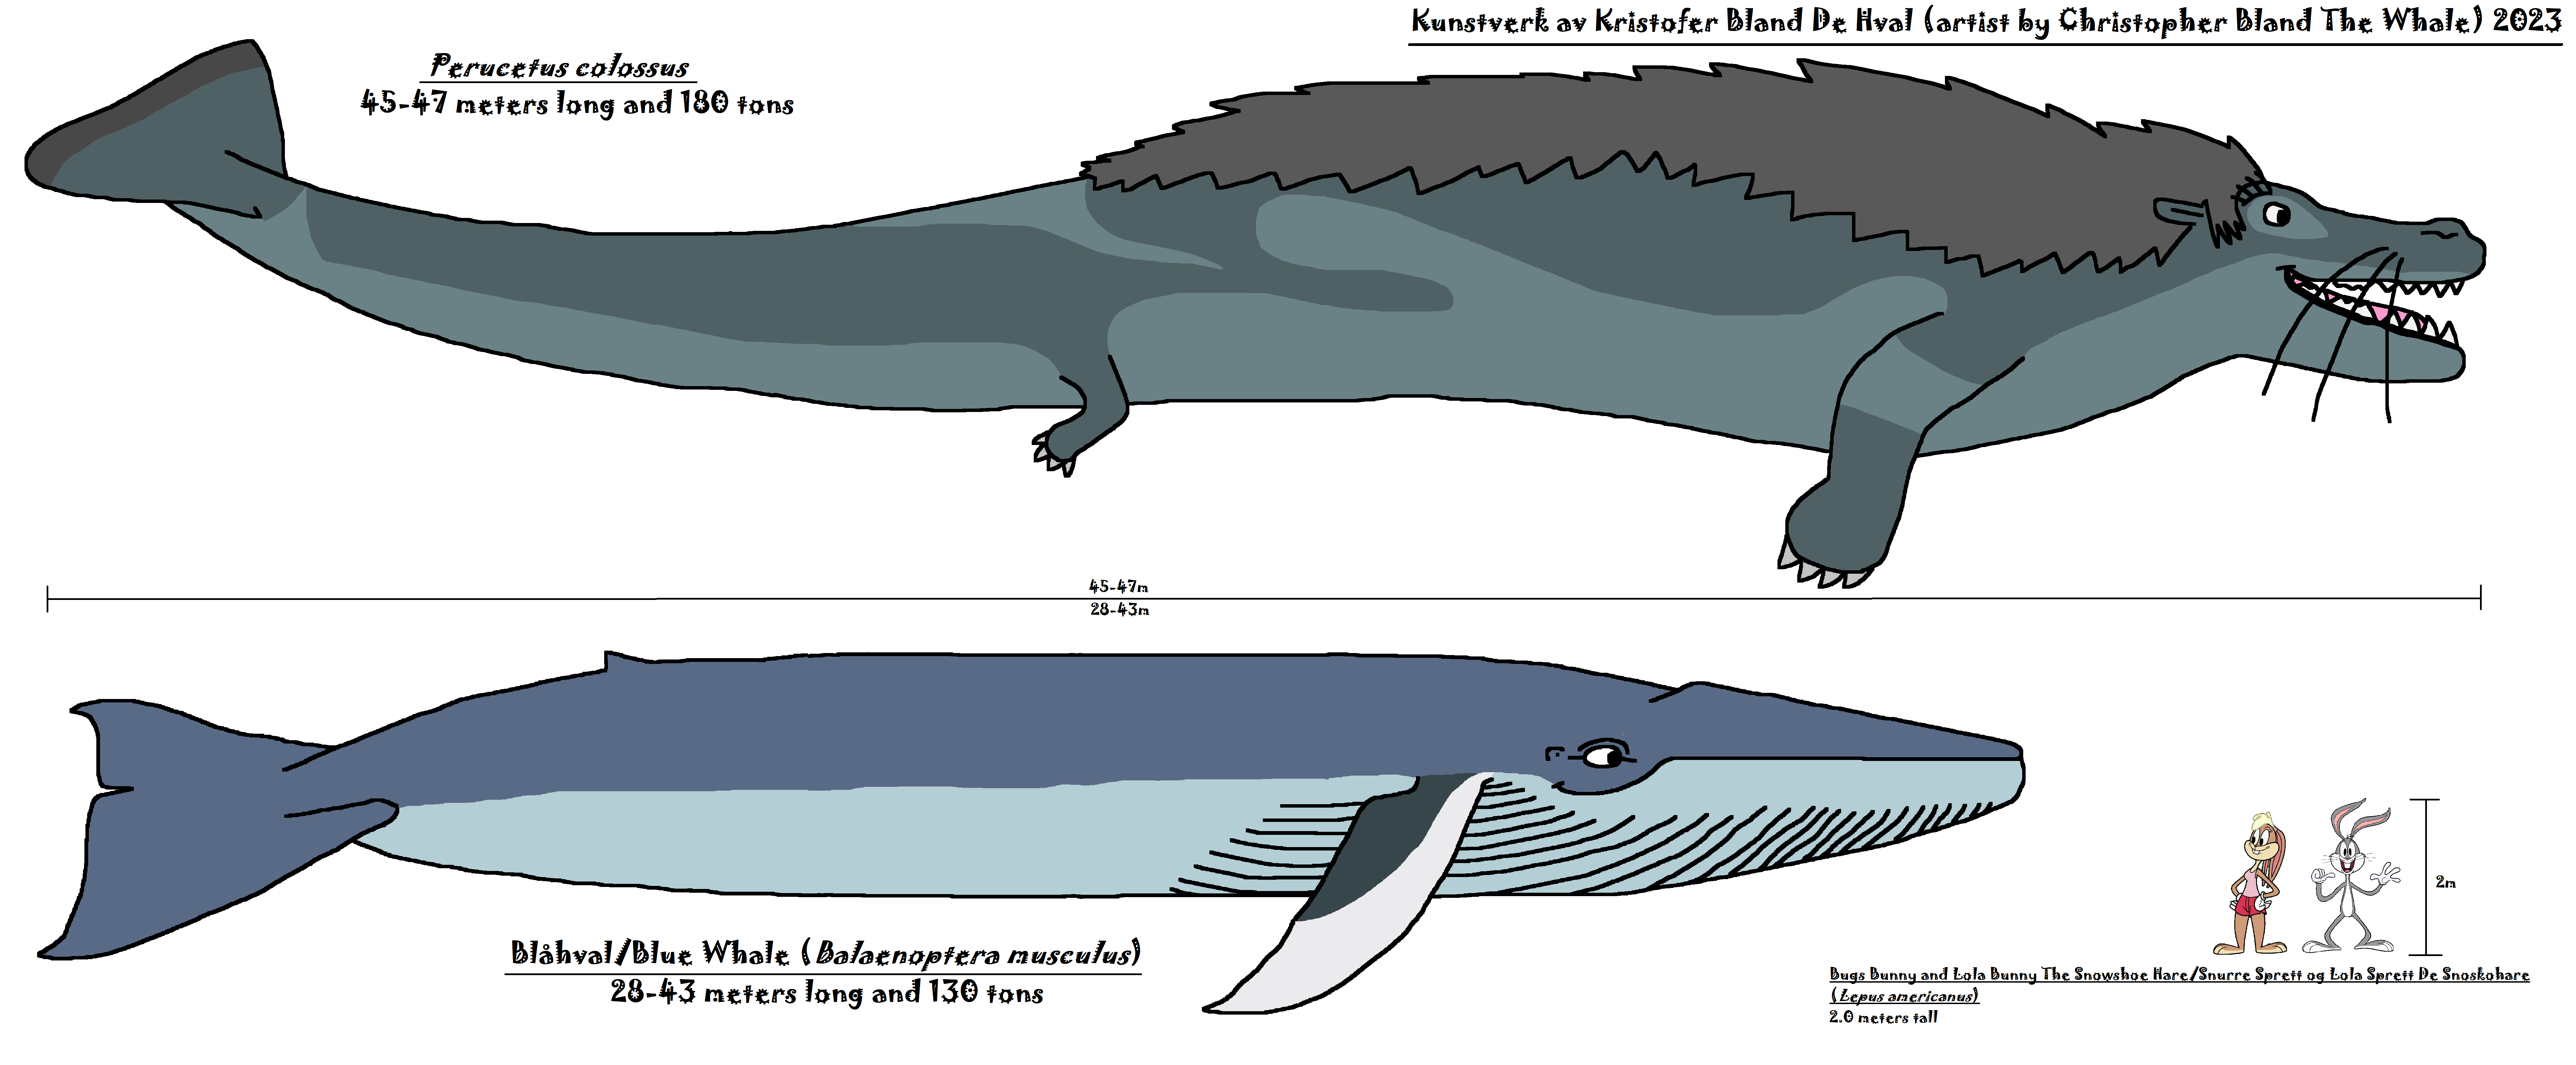 Perucetus size comparison by ChristopherBland on DeviantArt